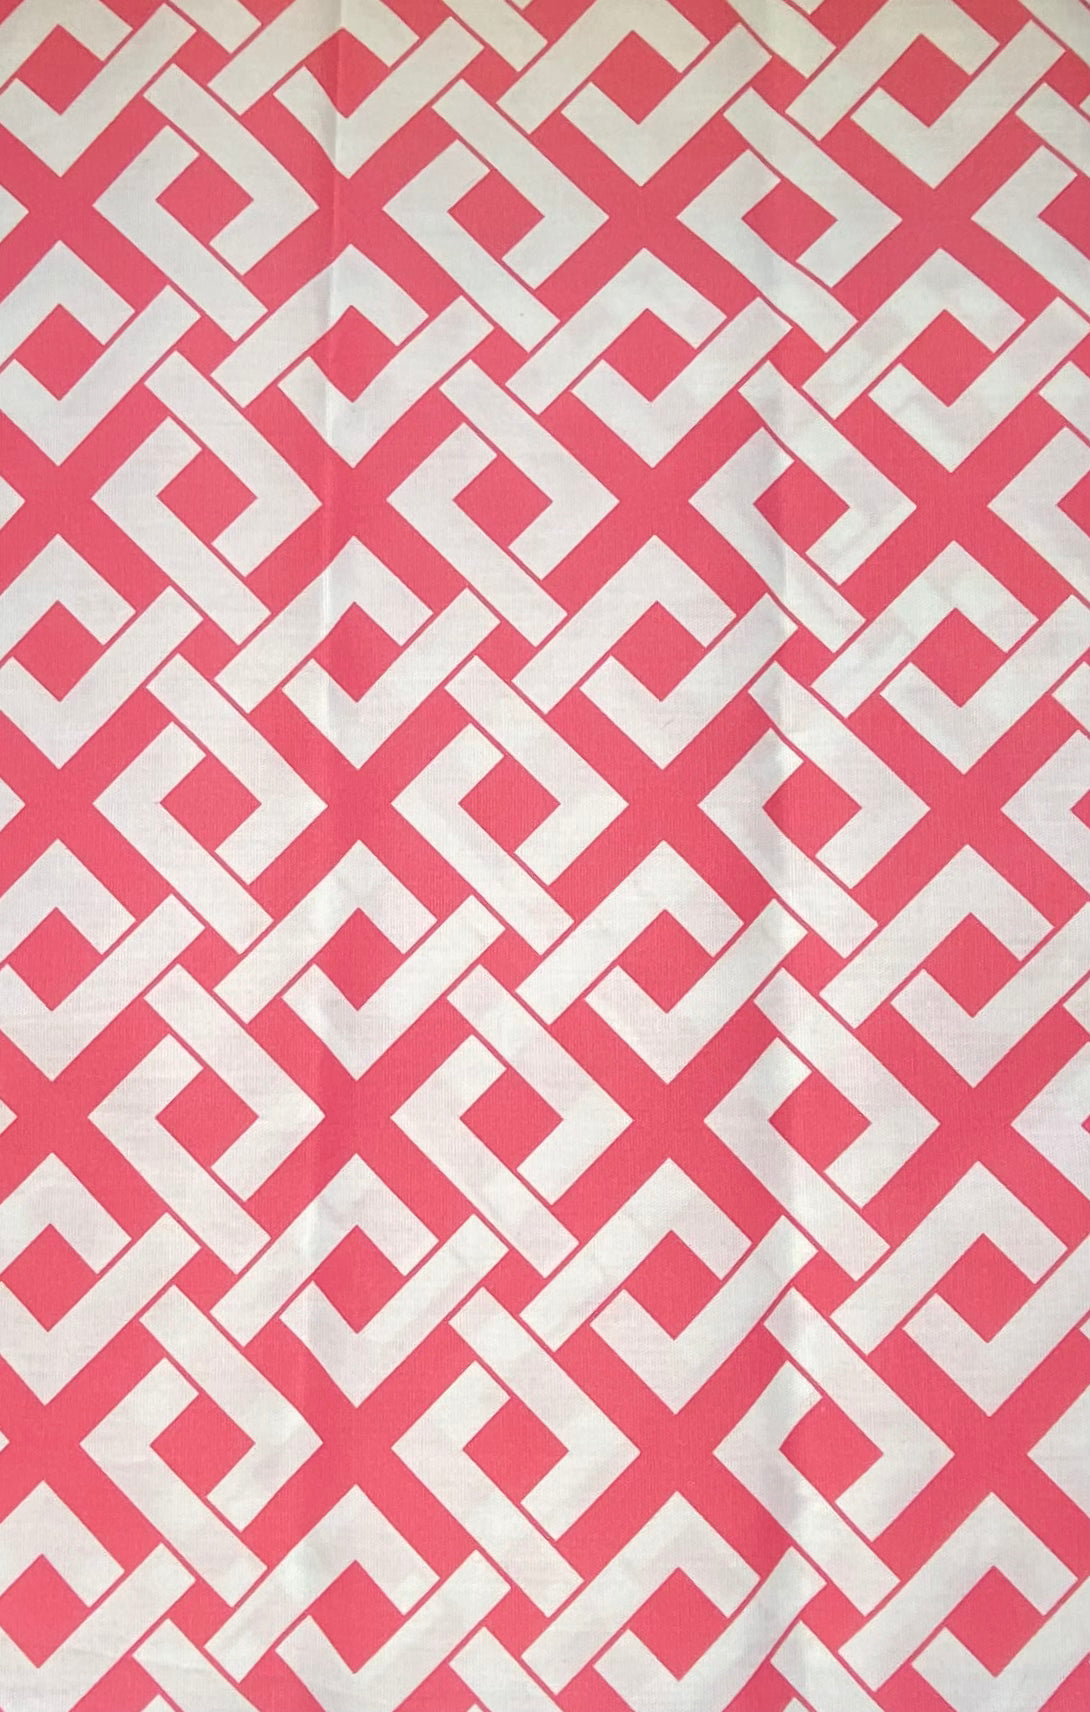 Printed Indoor/Outdoor Canvas - Geometric - Pink/White